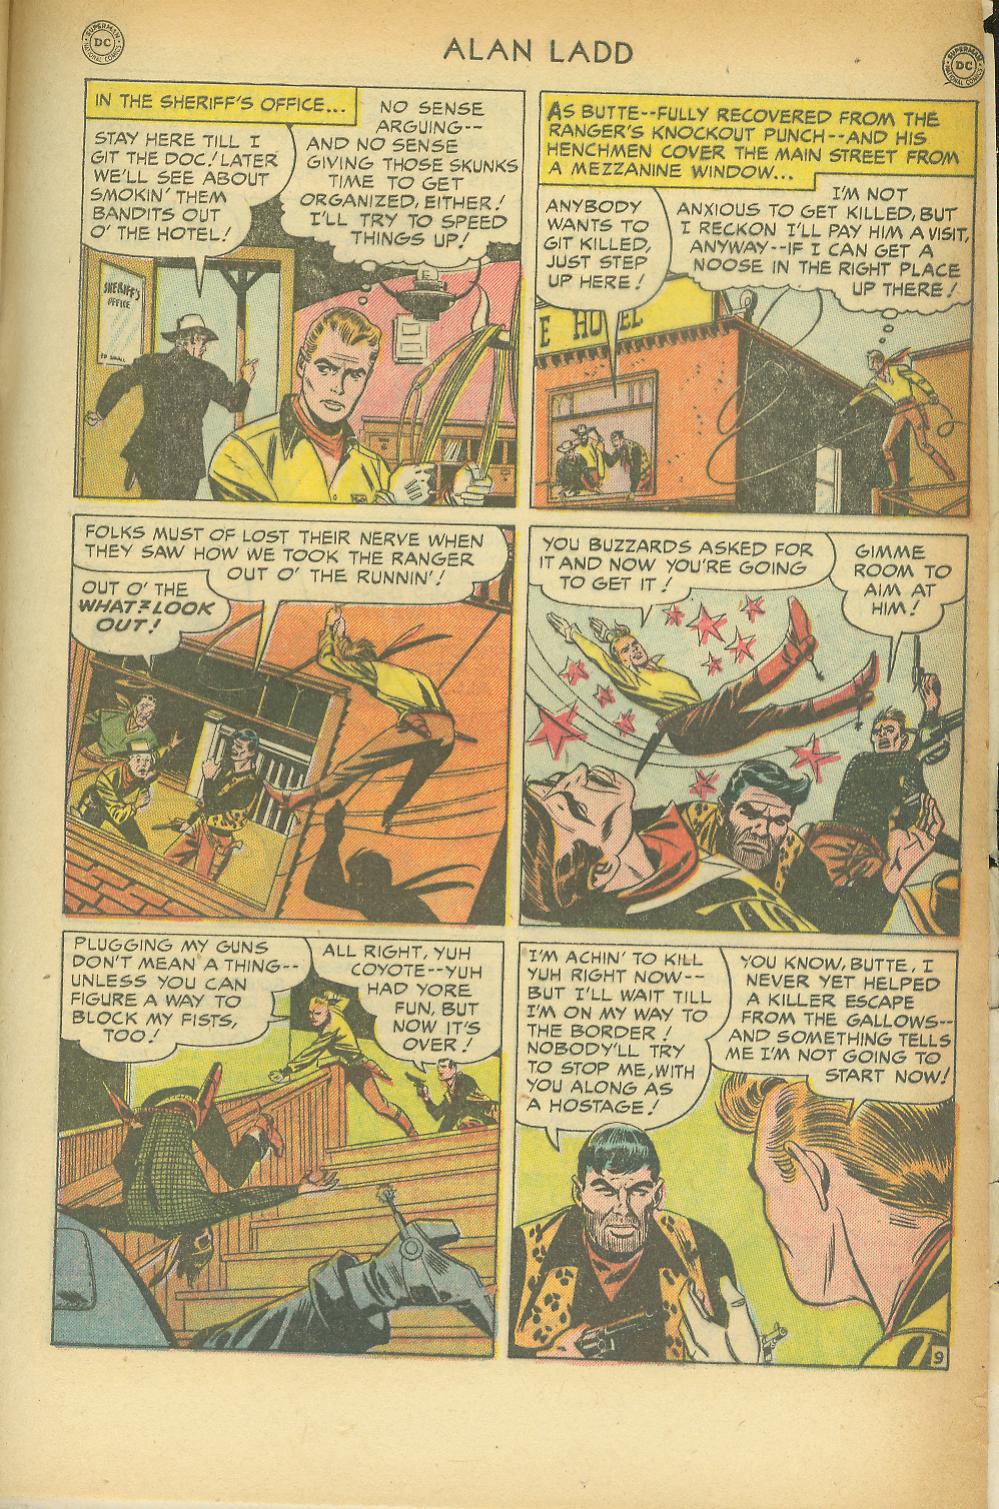 Read online Adventures of Alan Ladd comic -  Issue #8 - 47